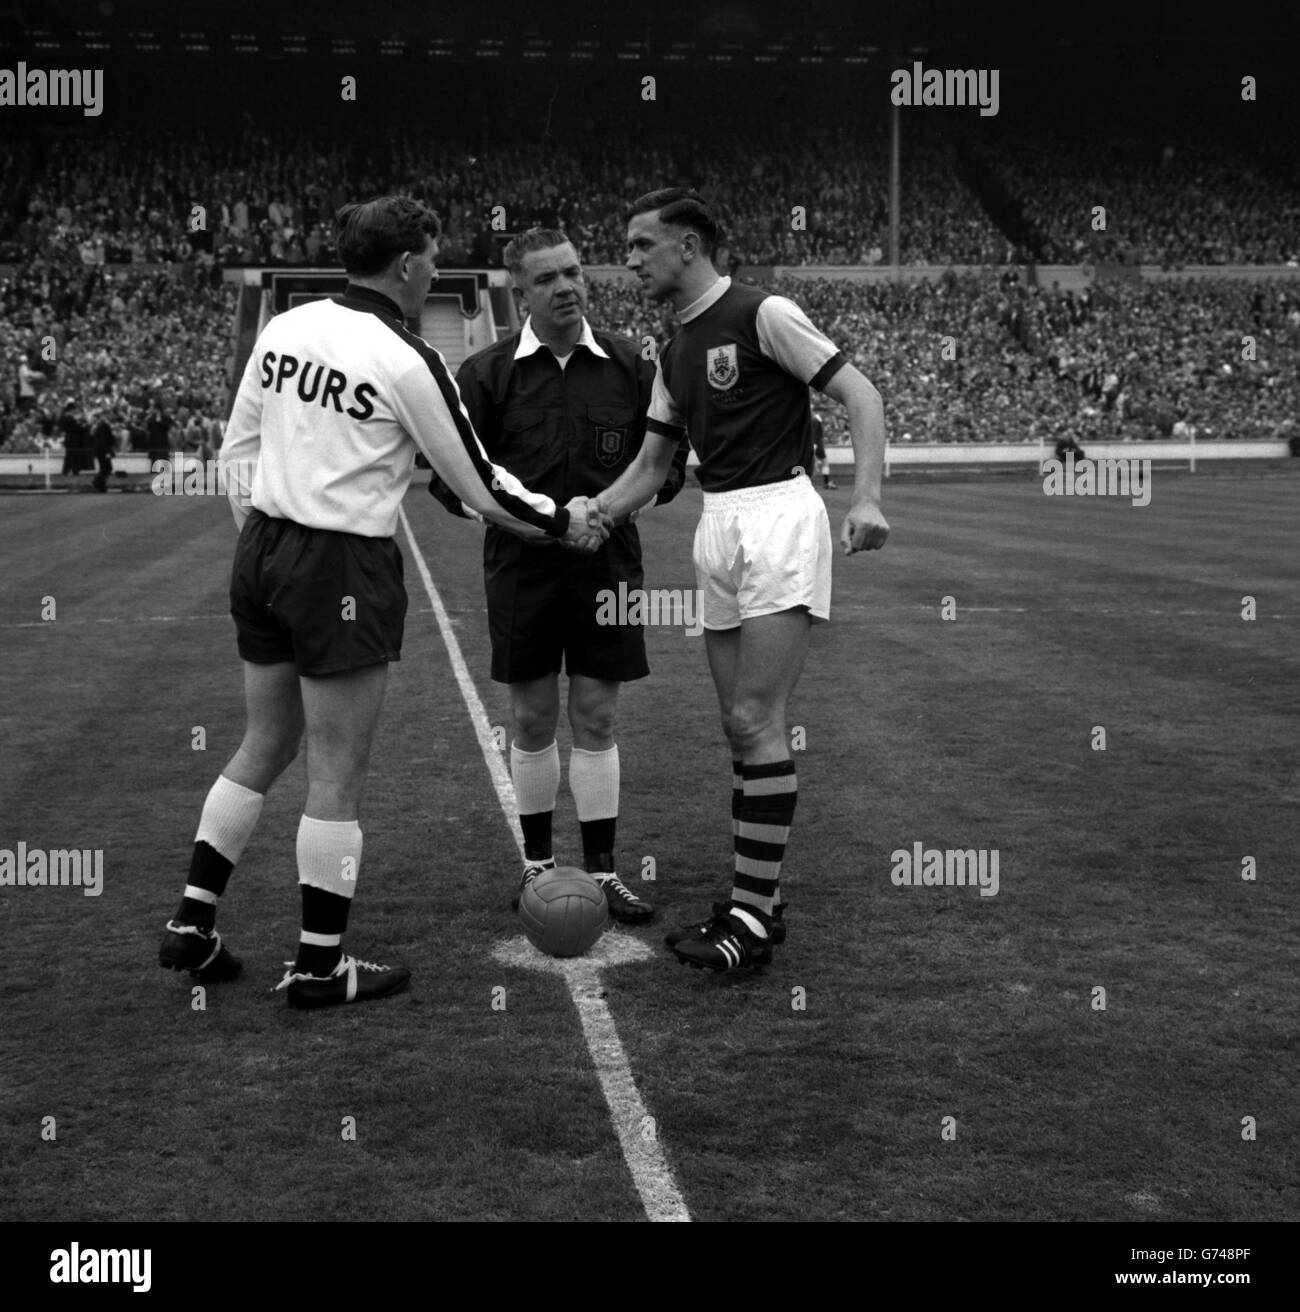 The two Captains, Danny Blanchflower of Tottenham Hotspurs (left) and Jimmy Adamson of Burnley, both righ-halves, shake hands before the kick-off in the FA Cup final at the Empire Stadium, Wembley. Centre is the referee, Mr J Finney of Hereford Stock Photo